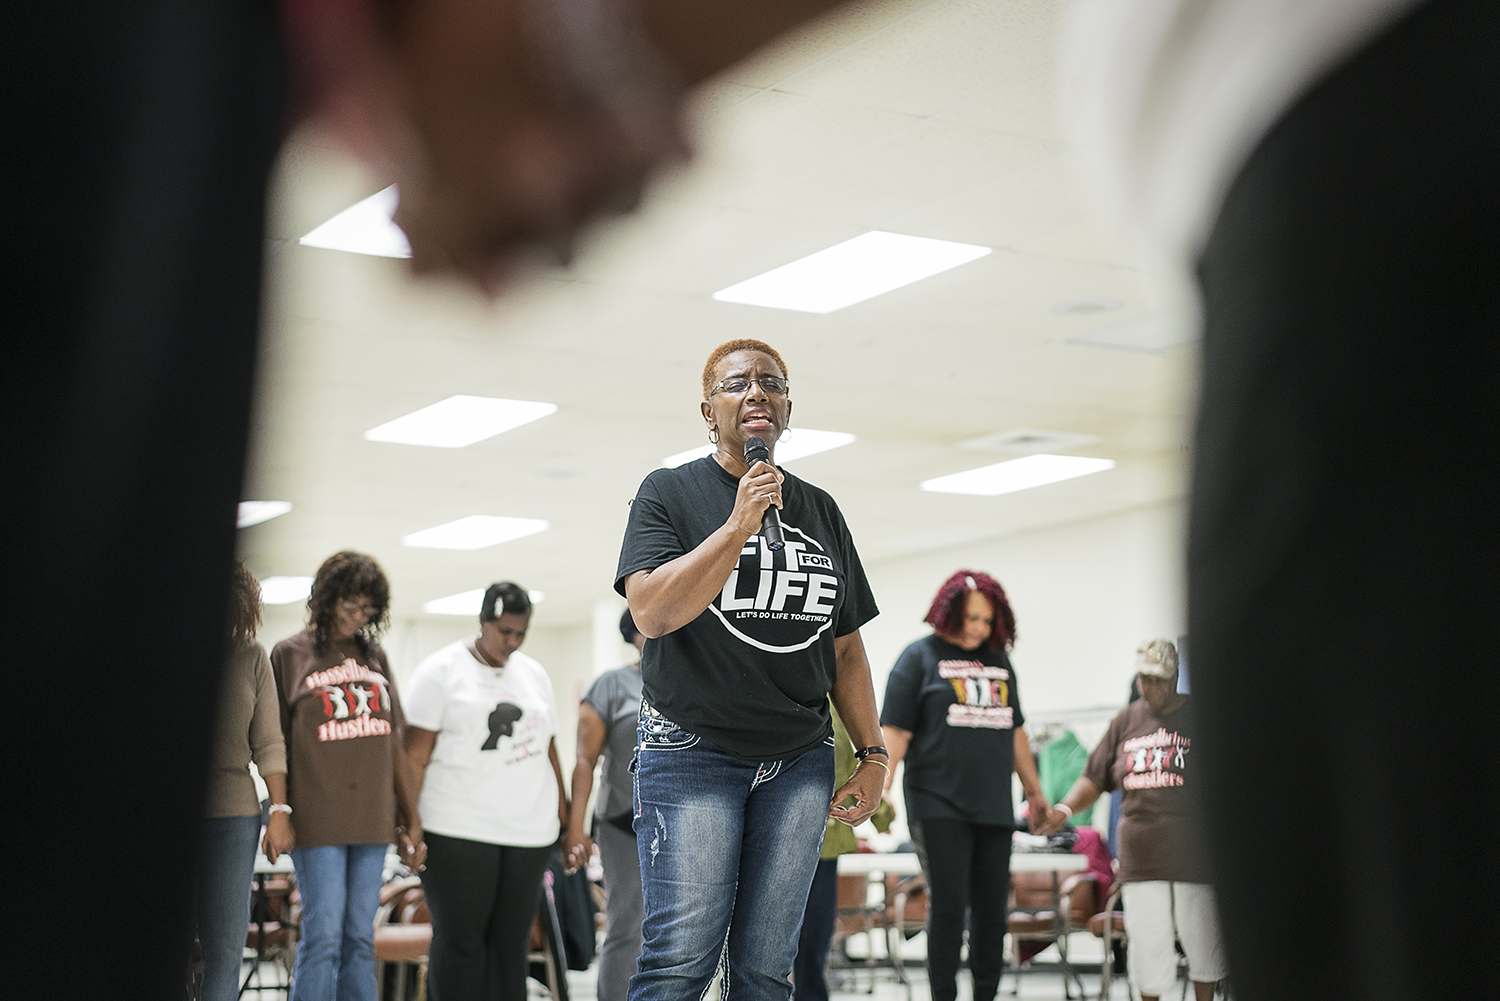 Queenella McGee, 66, of Flint leads the Hasselbring Hustlers in prayer before they finish their dancing for the day at the Hasselbring Senior Community Center. 